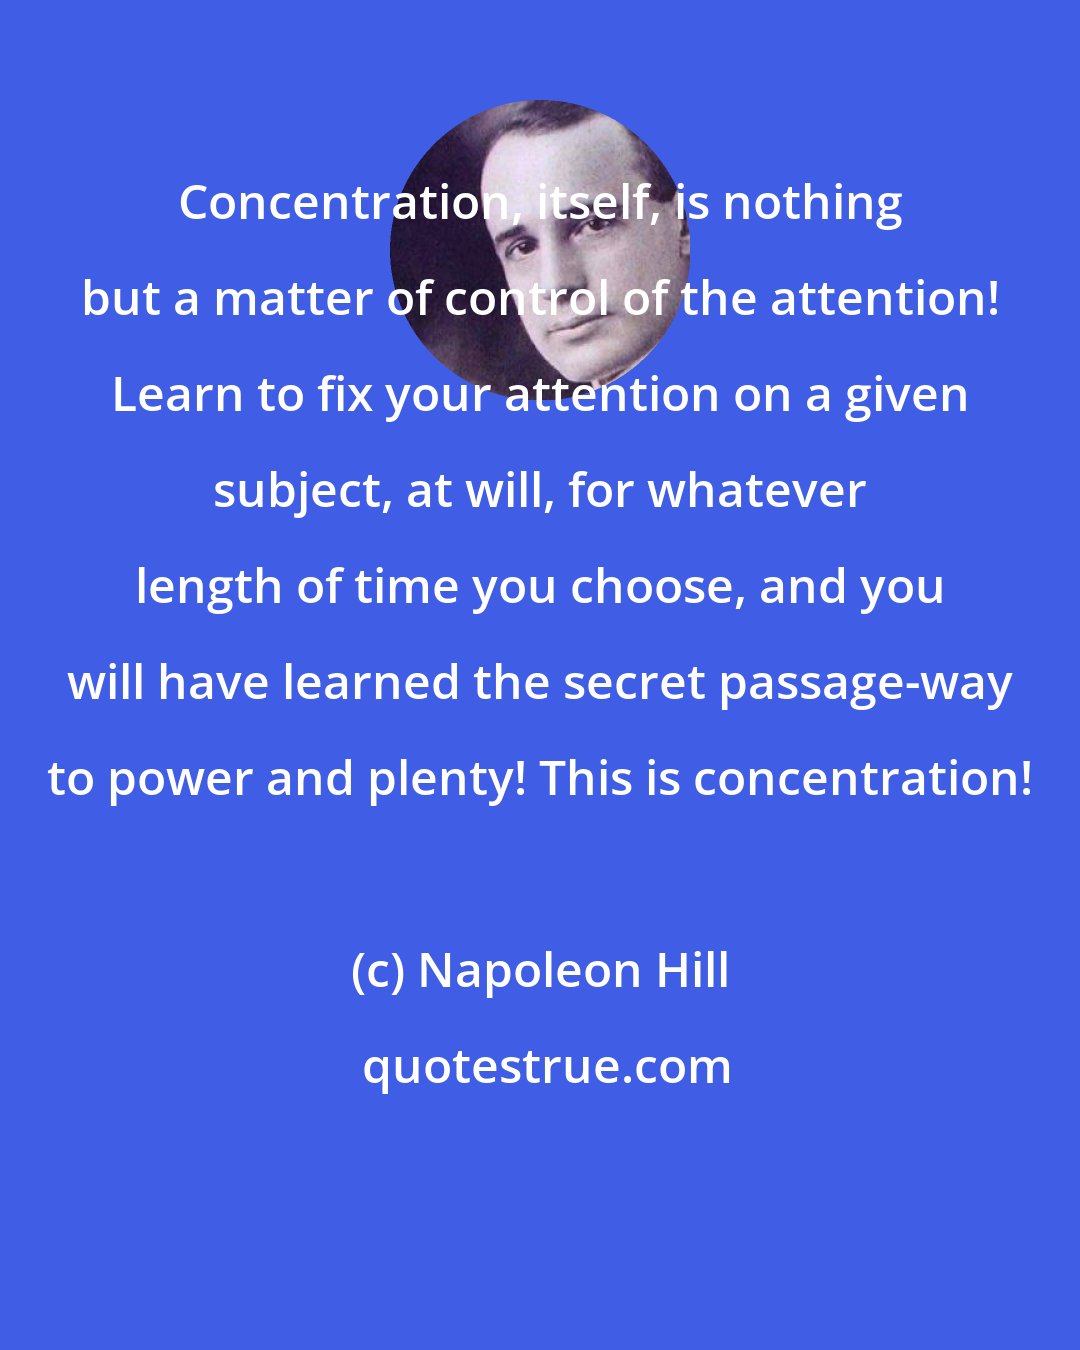 Napoleon Hill: Concentration, itself, is nothing but a matter of control of the attention! Learn to fix your attention on a given subject, at will, for whatever length of time you choose, and you will have learned the secret passage-way to power and plenty! This is concentration!